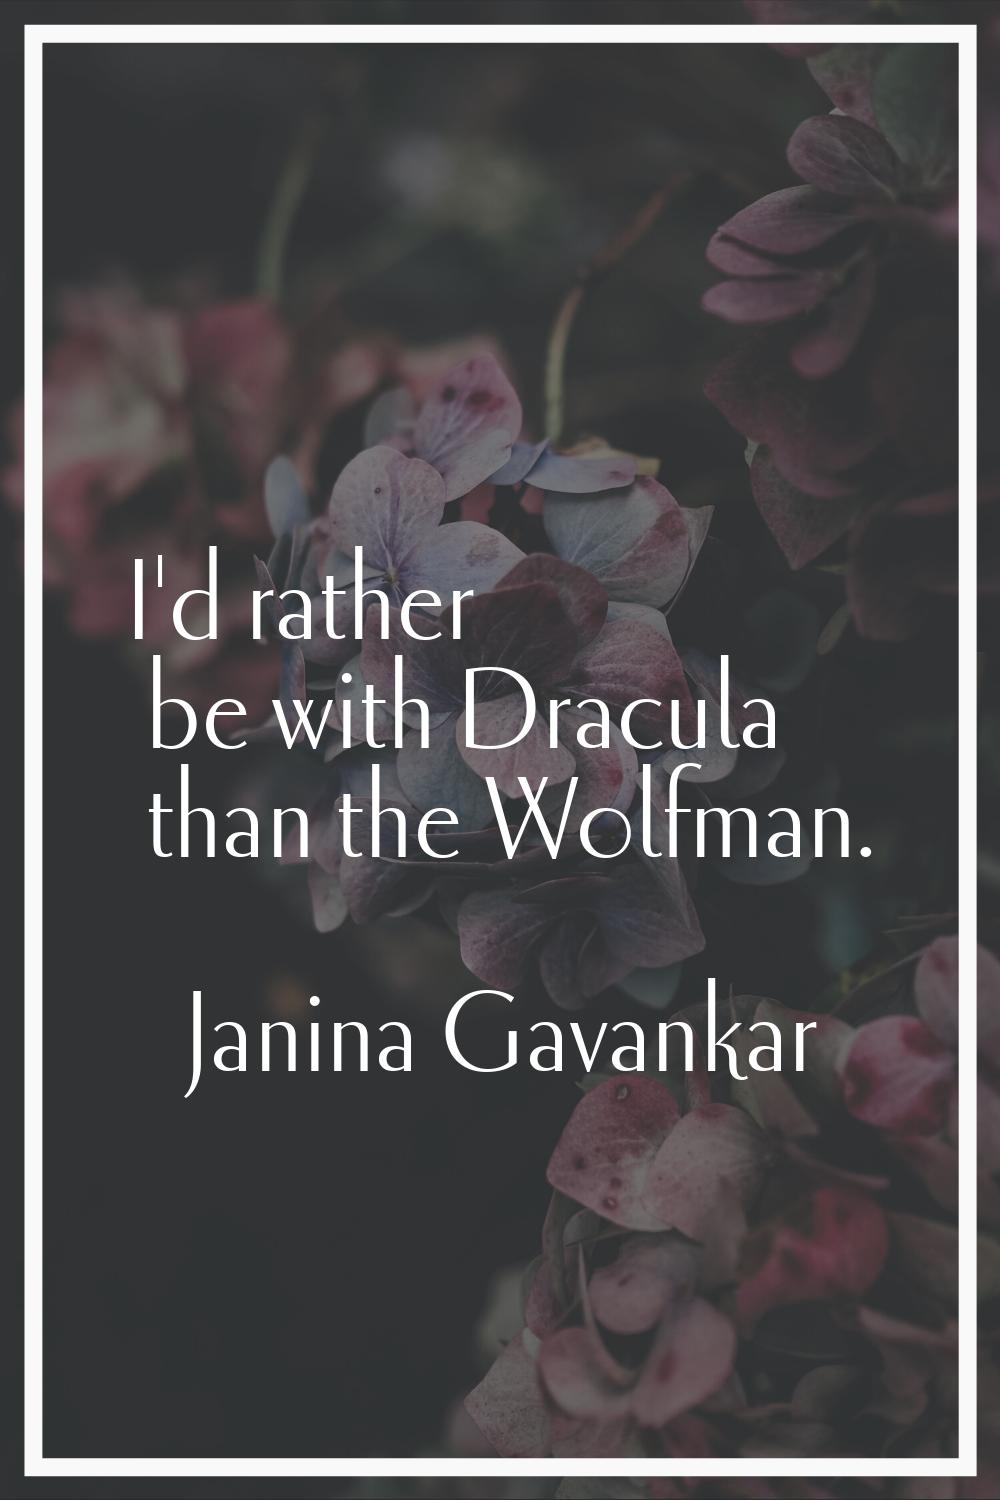 I'd rather be with Dracula than the Wolfman.